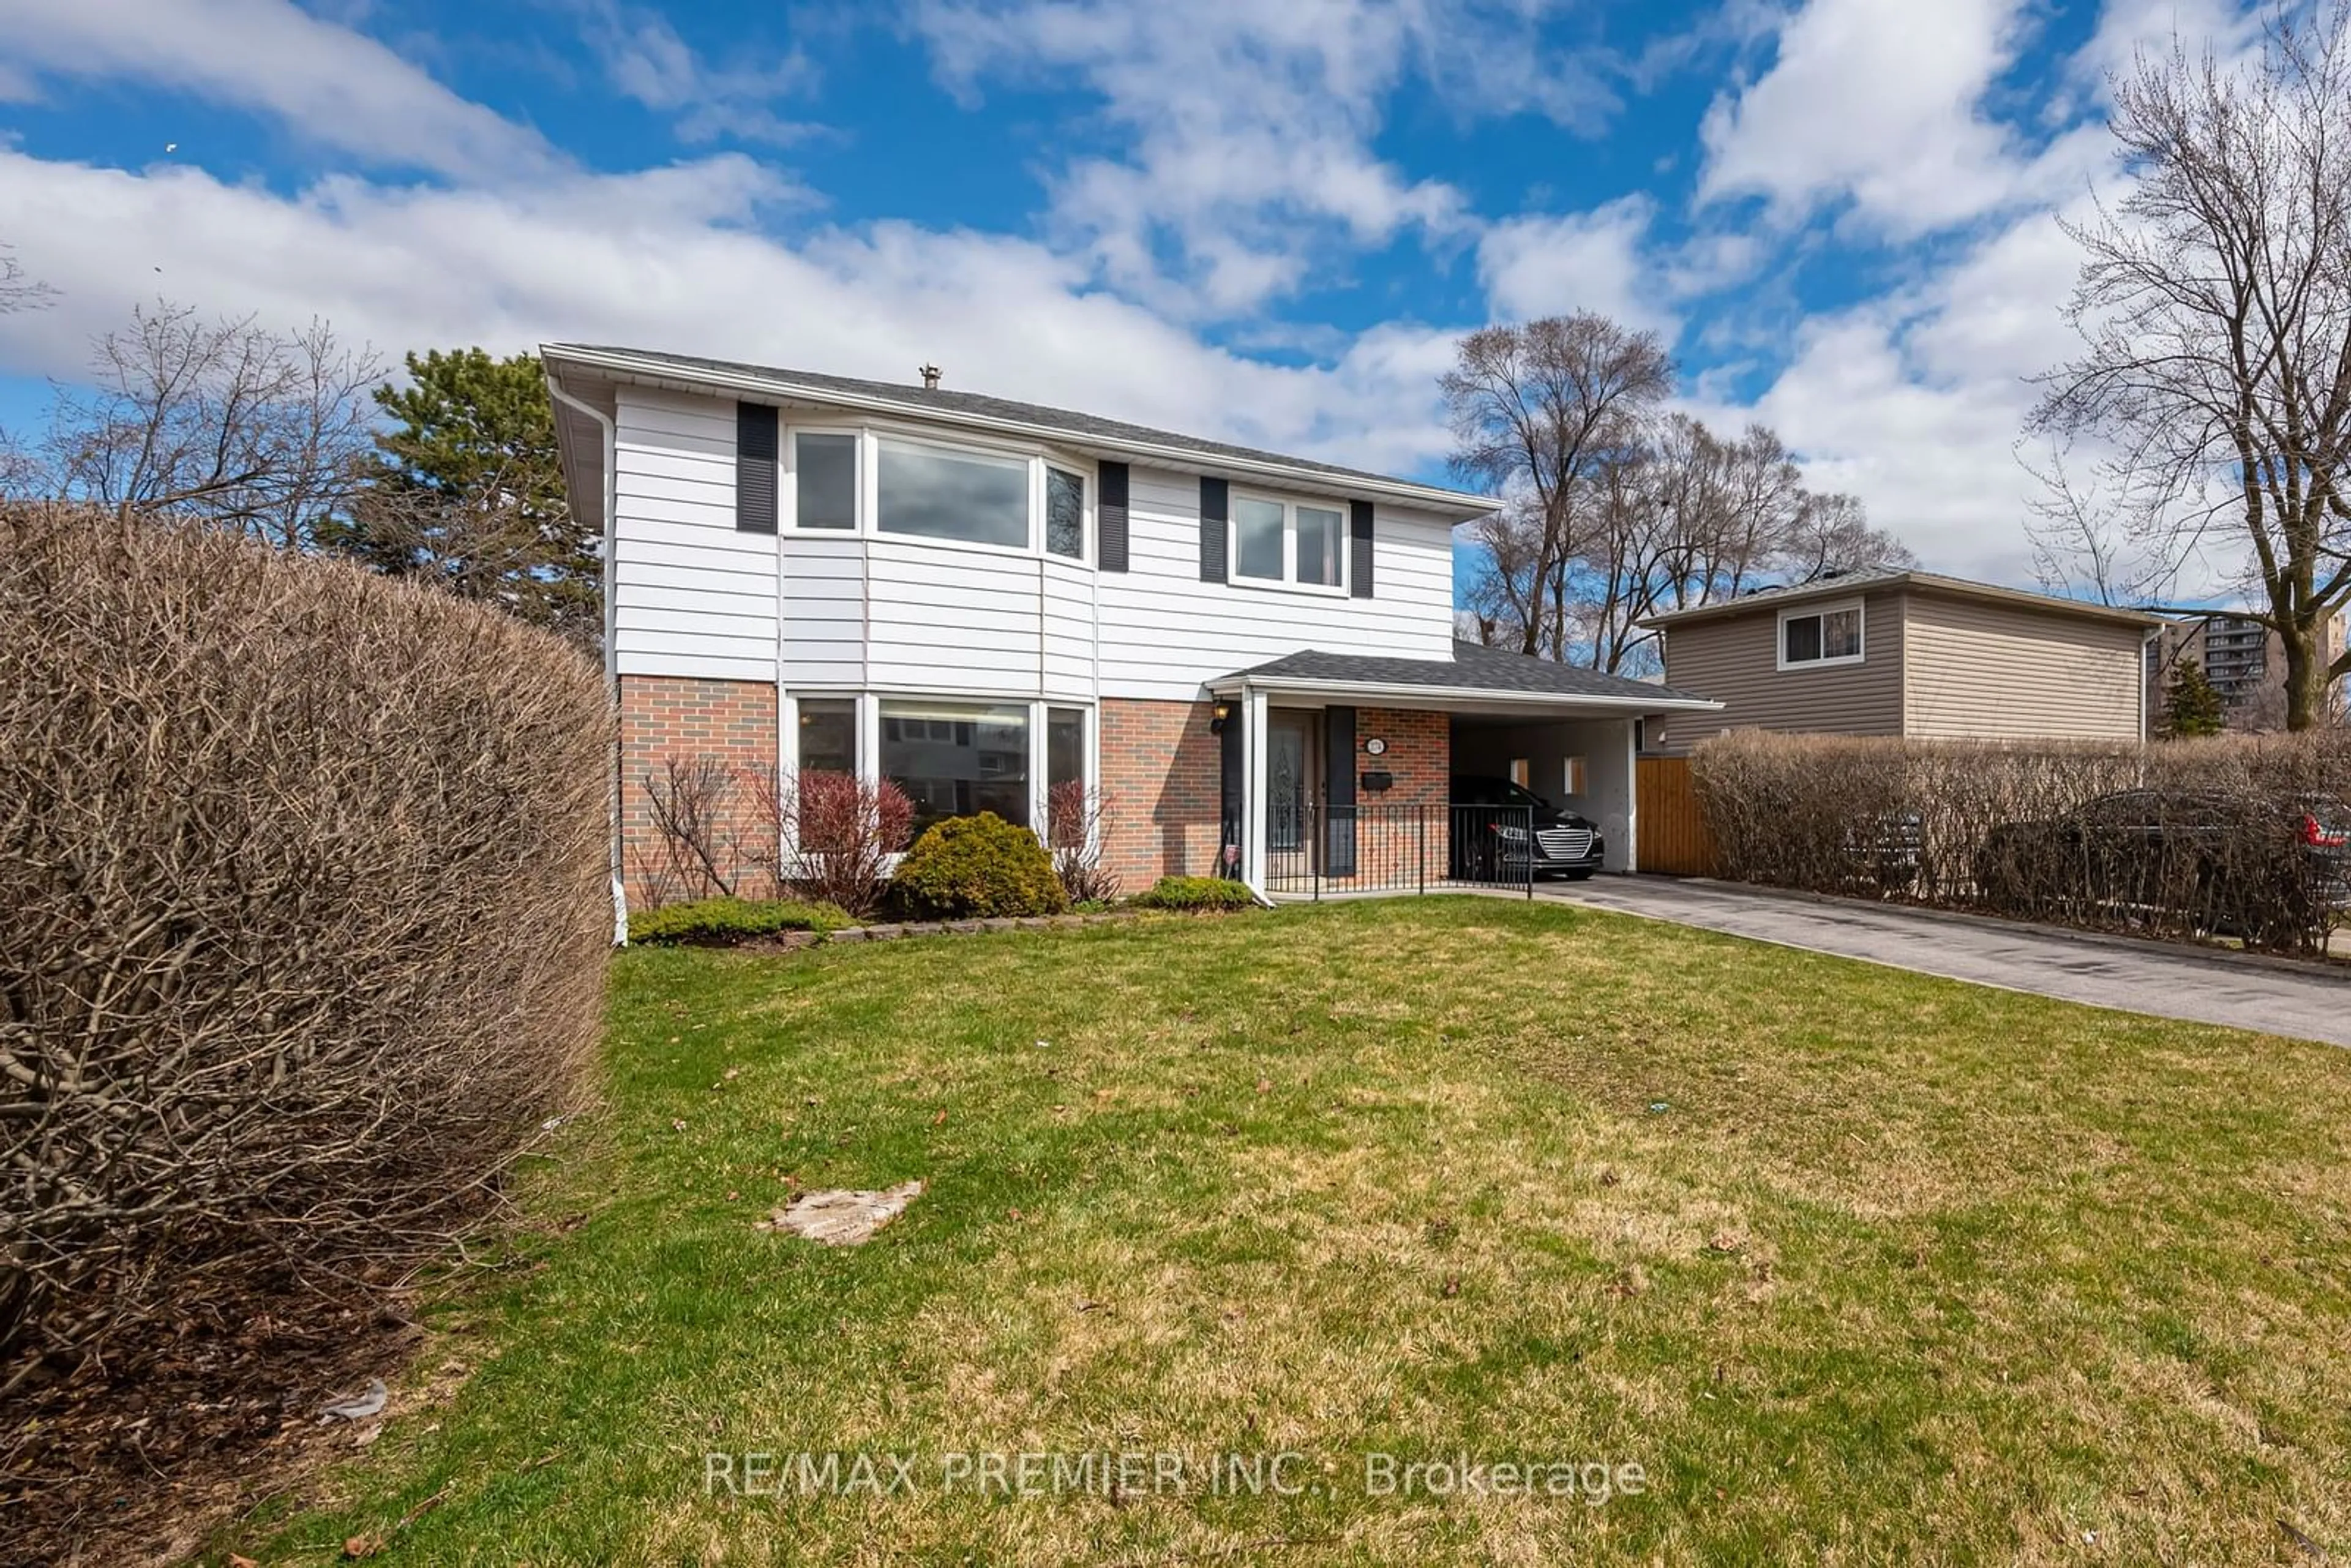 Frontside or backside of a home for 274 Bartley Bull Pkwy, Brampton Ontario L6W 2L3